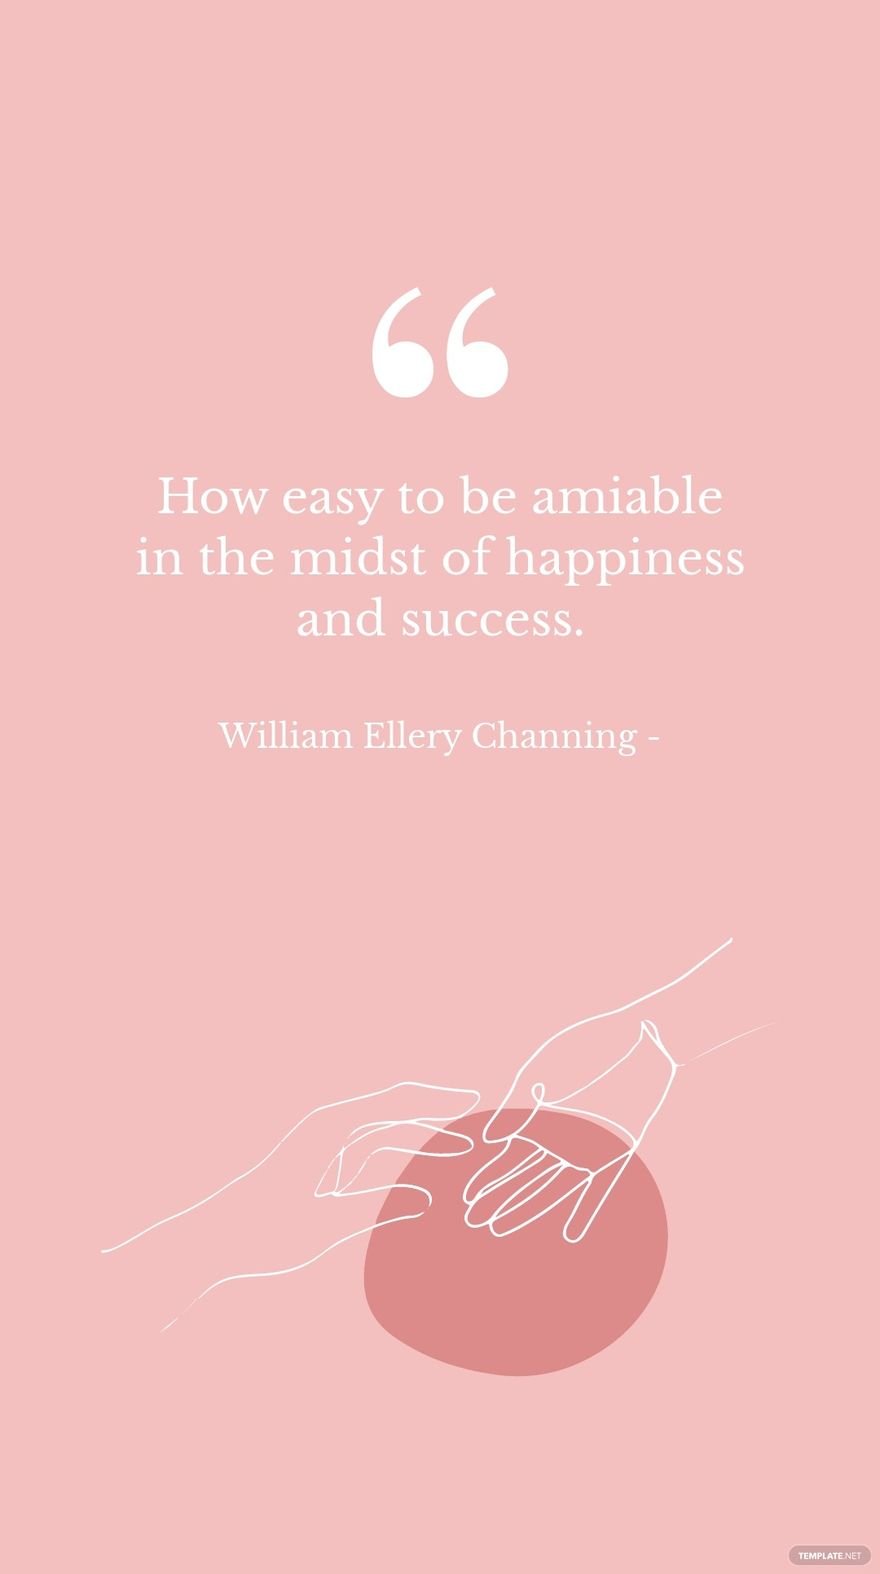 William Ellery Channing - How easy to be amiable in the midst of happiness and success.